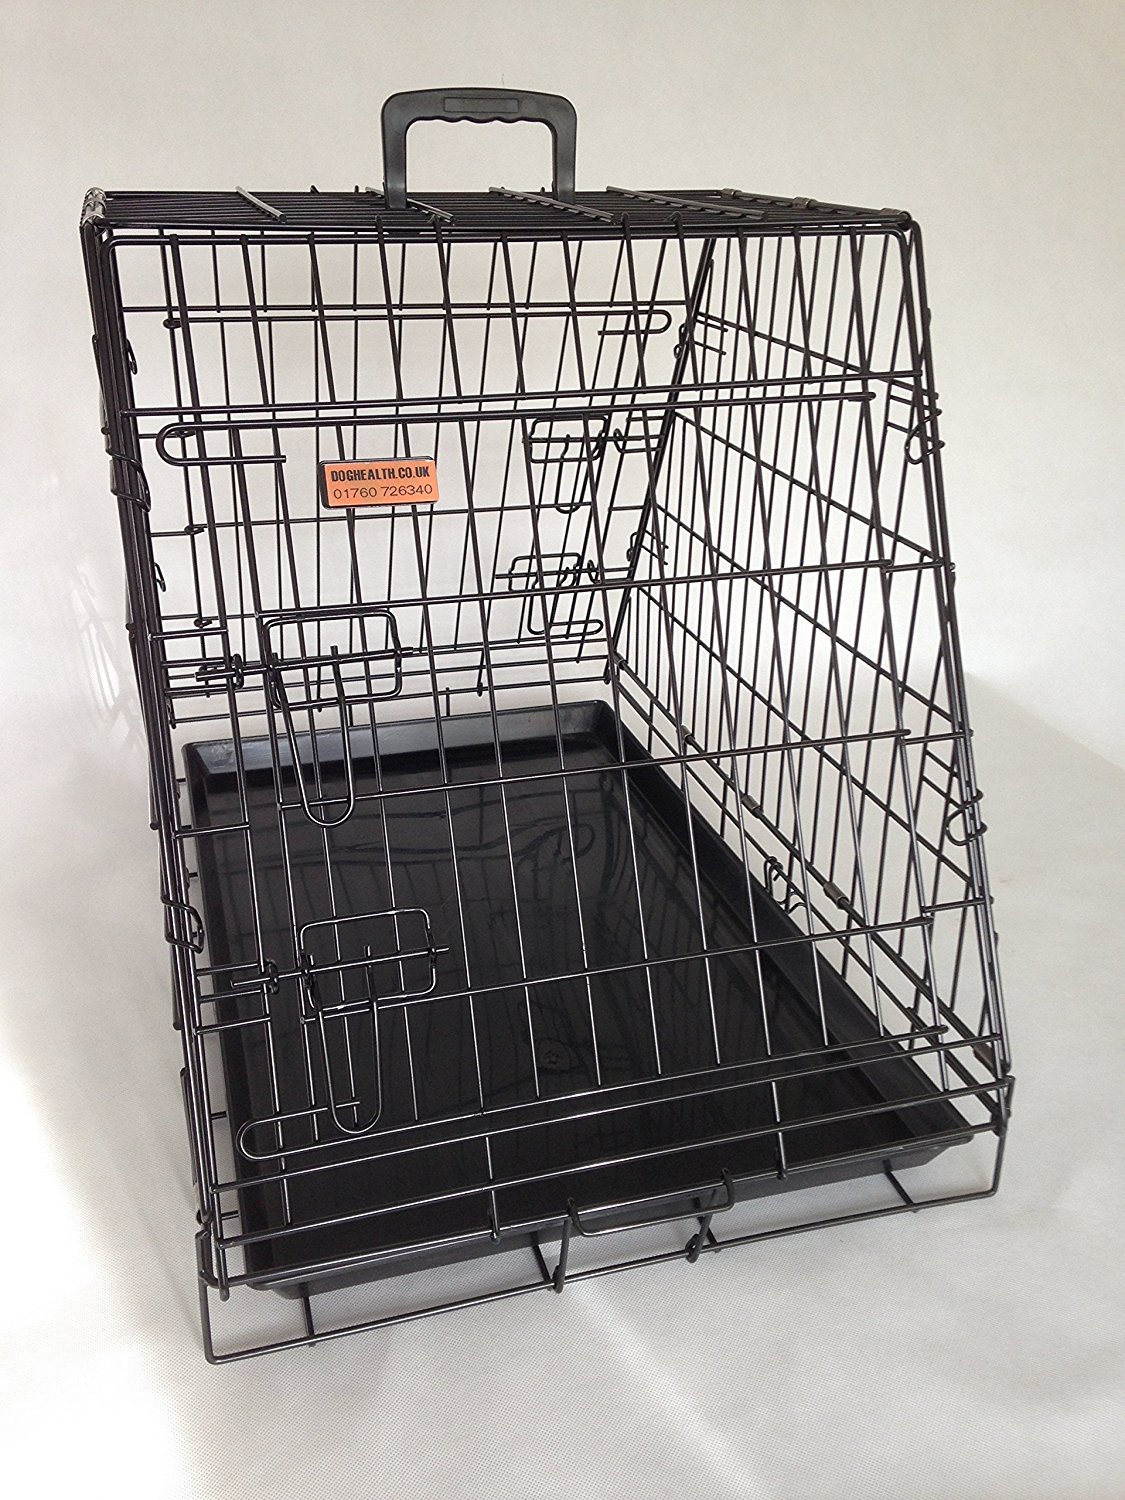 Review of Ellie-Bo Dog Travel Crate